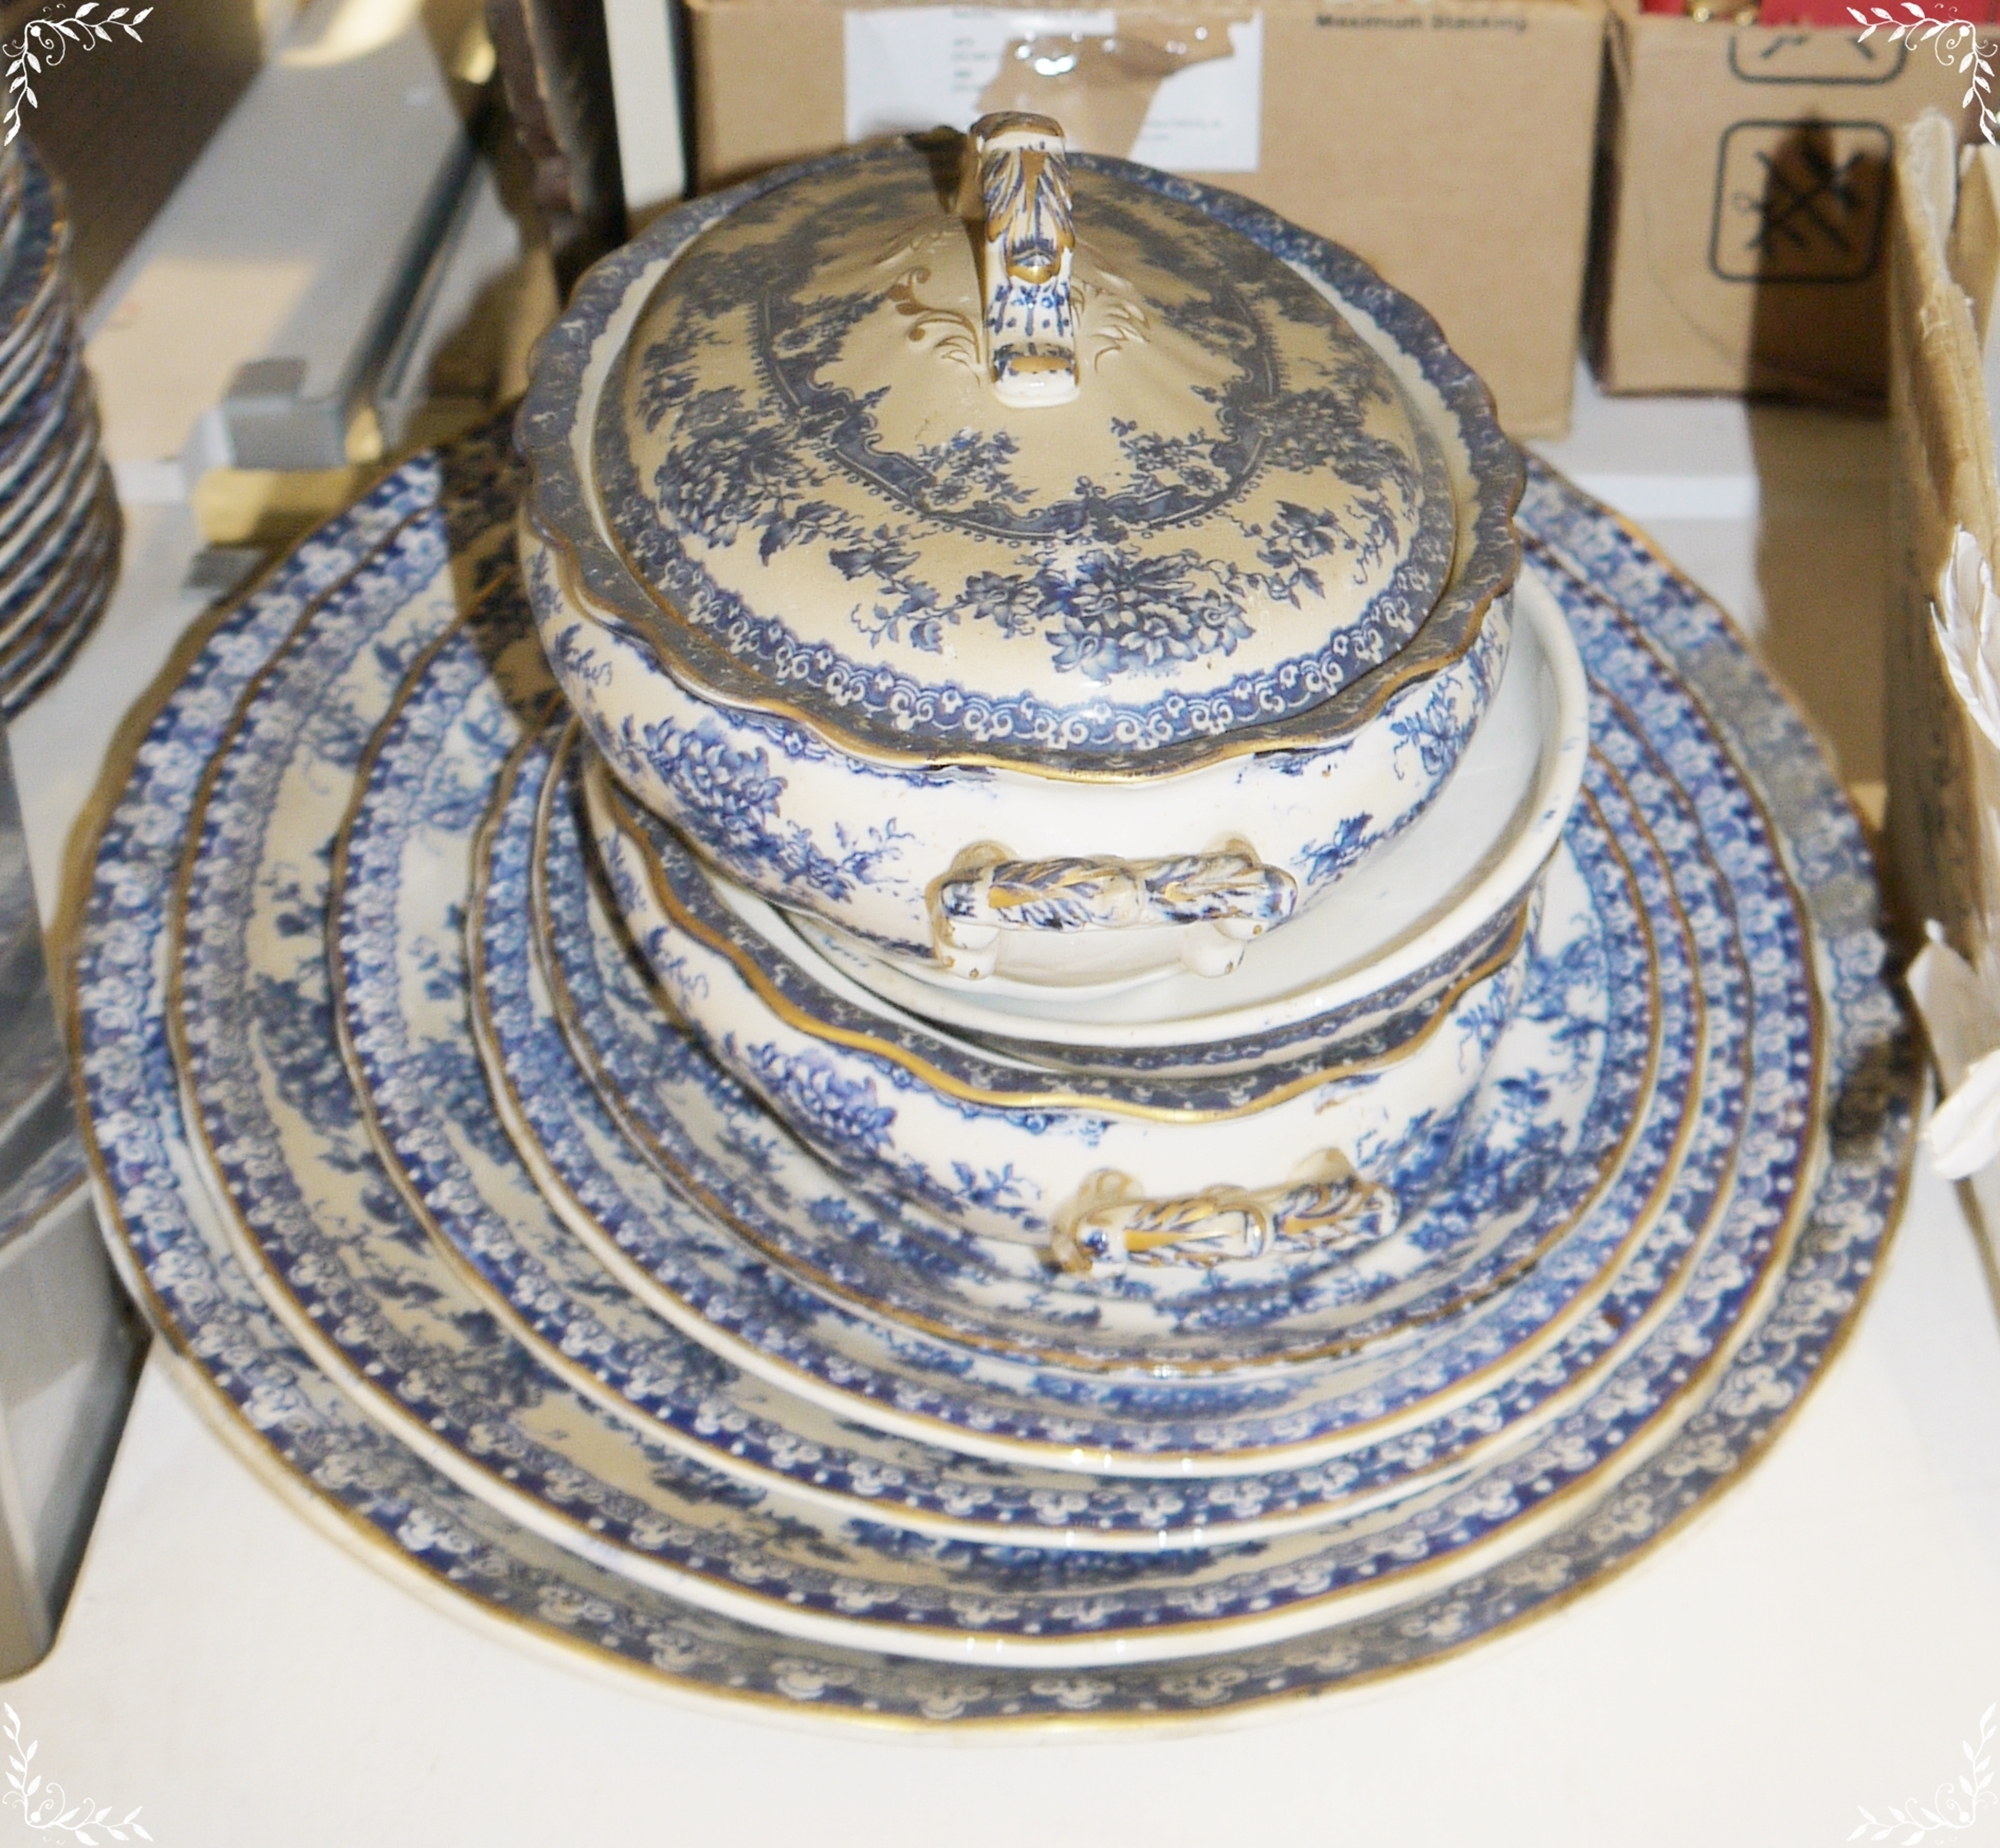 19th century Watford Latemayers part dinner service in blue and white with floral and gilt - Image 4 of 4